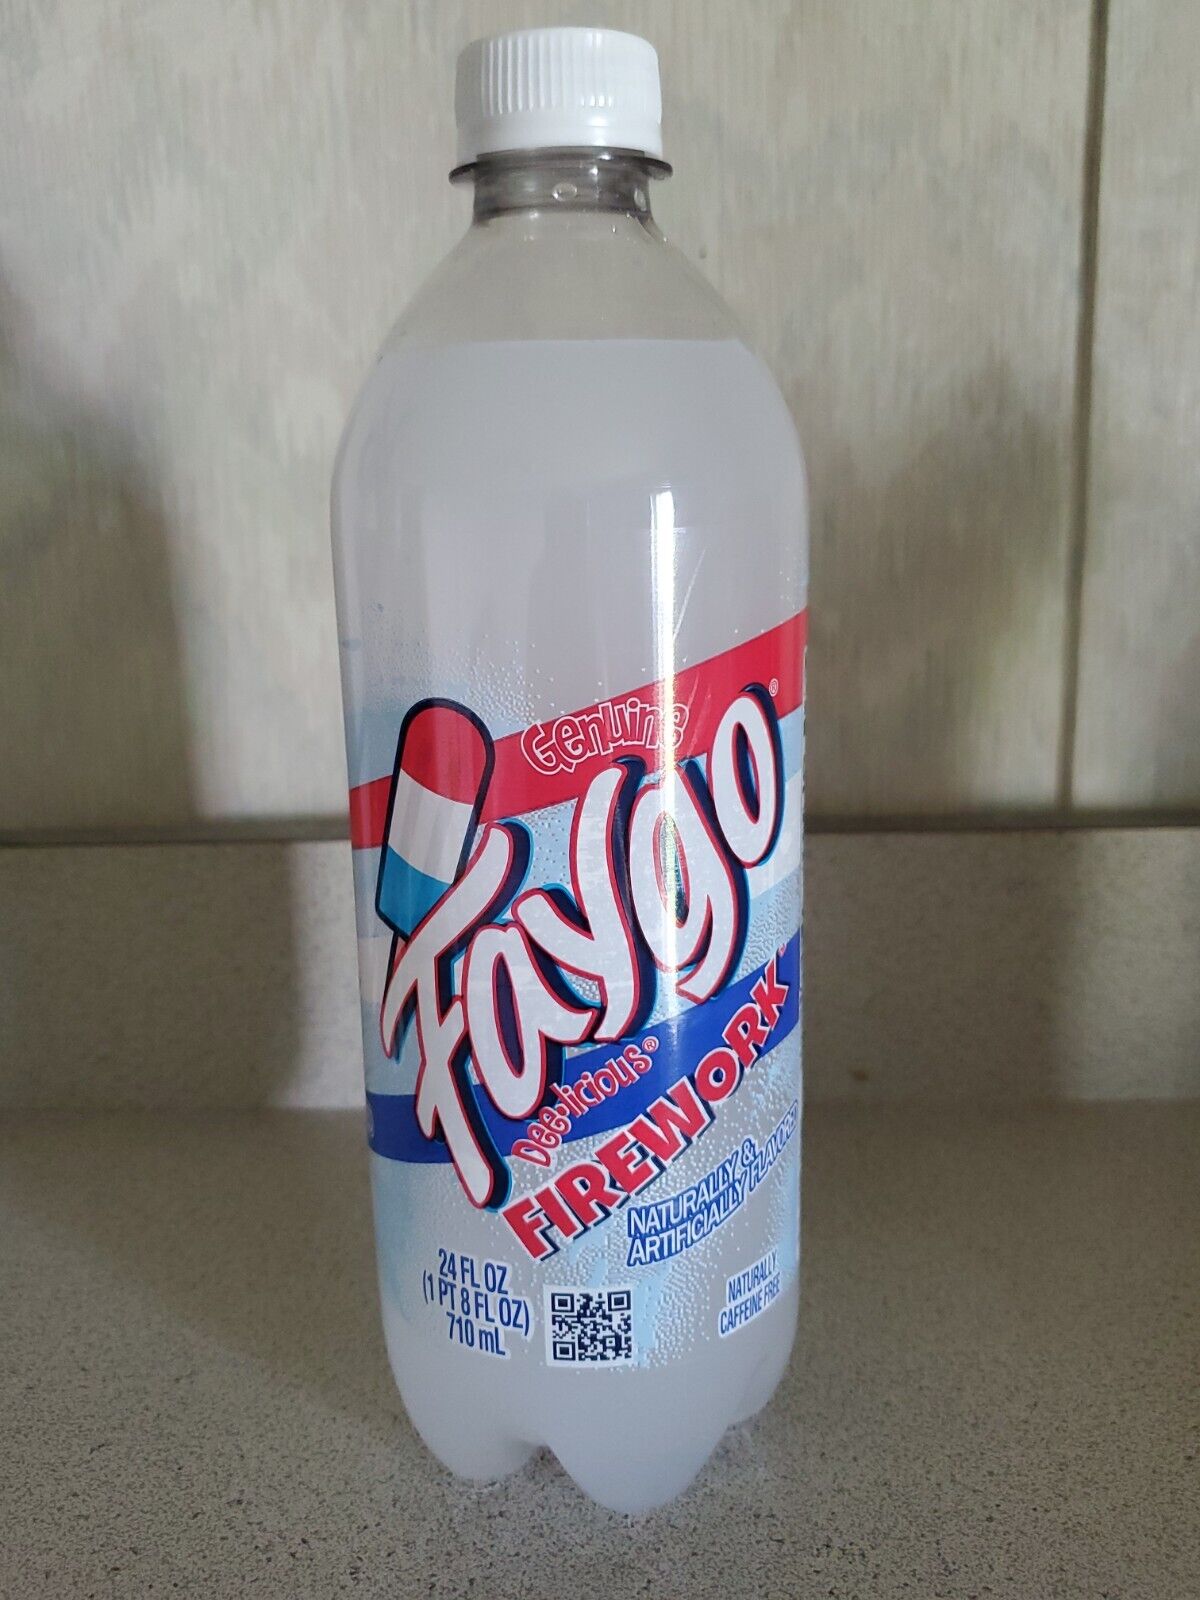 Full Faygo Firework Flavored Soda Pop 24oz Bottle 4th of July Limited Edition 